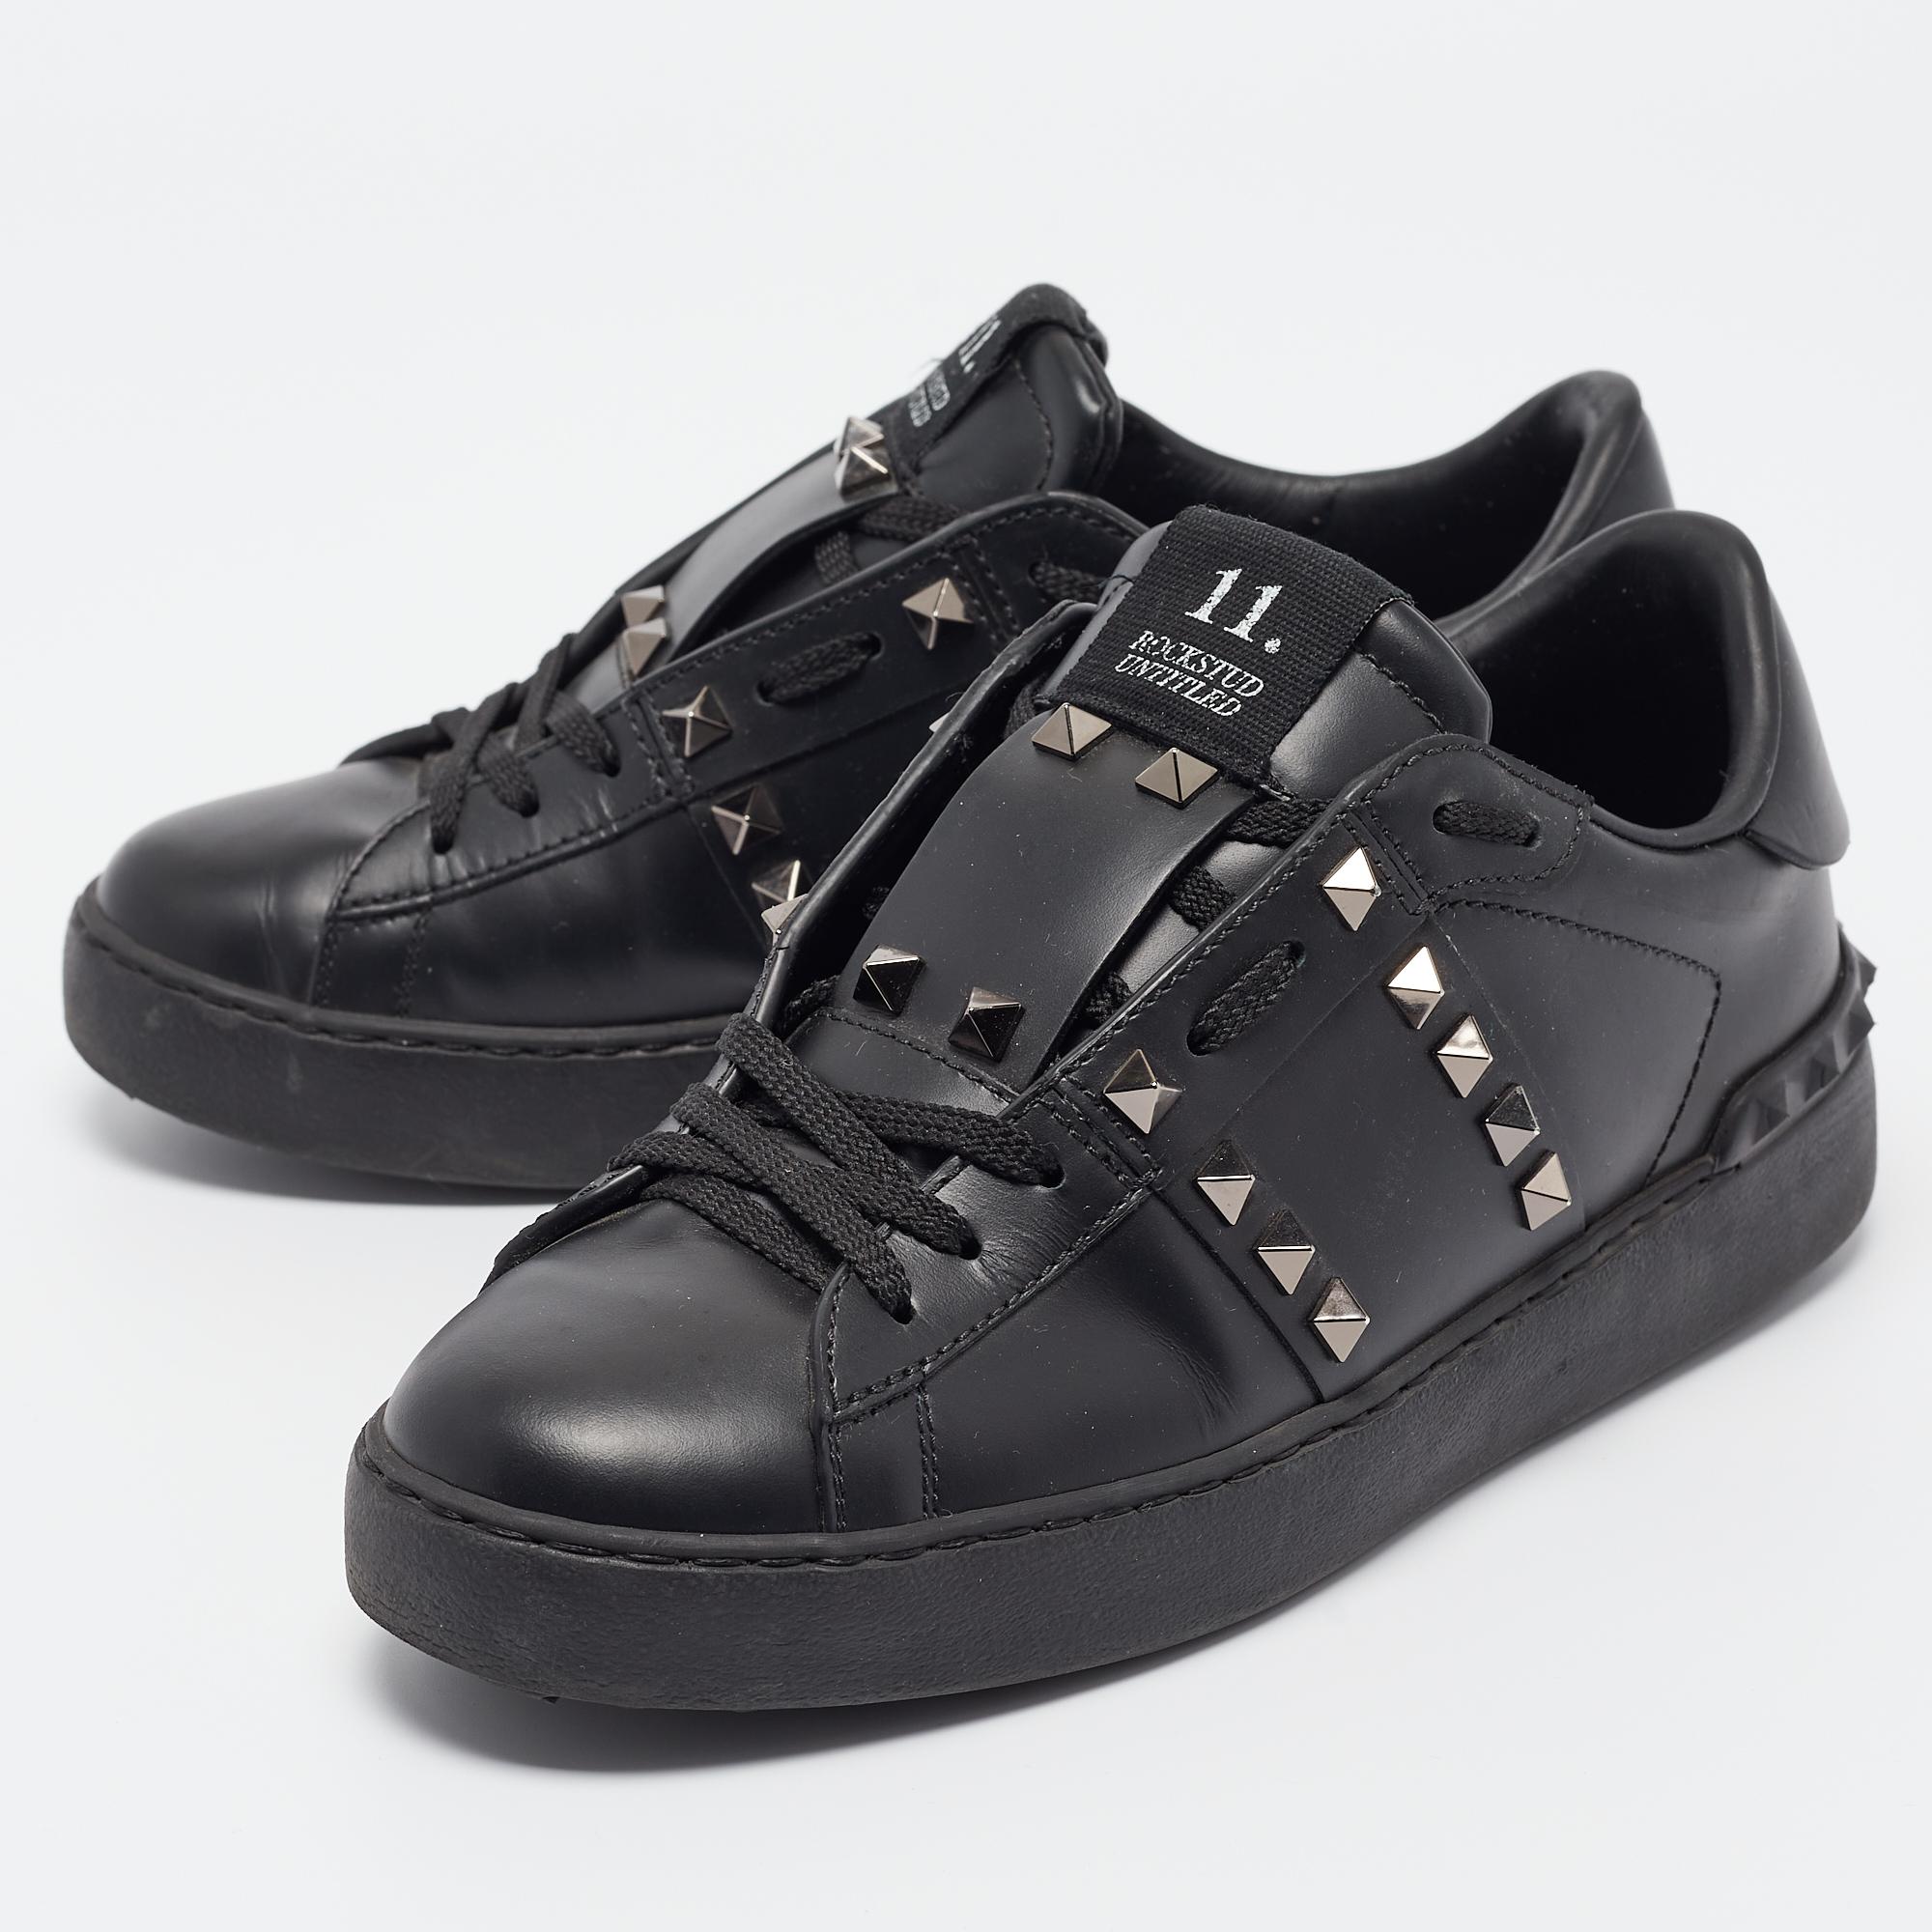 Valentino Black Leather Rockstud Low Top Sneakers Size 36.5 For Sale 2